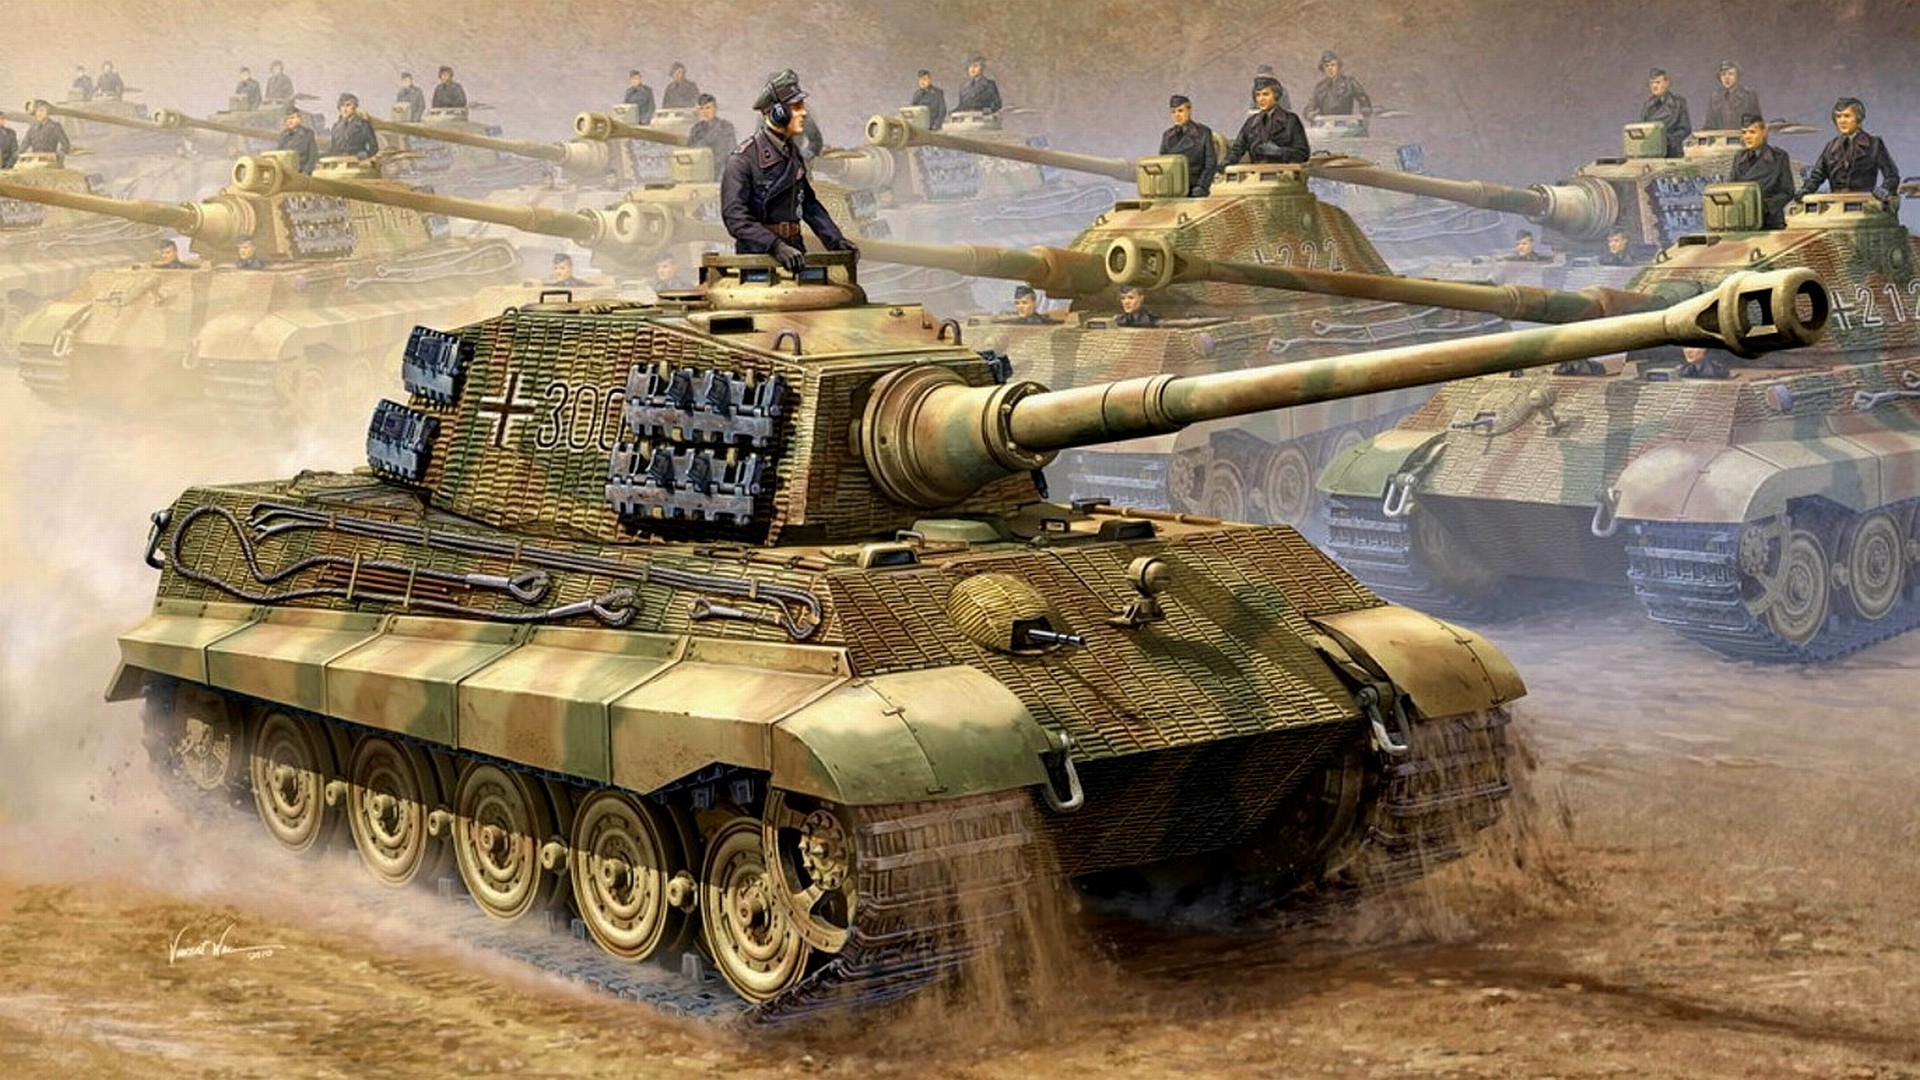 1920x1080  The King Tiger tank was one of the most feared weapons of world  war German King Tiger Tank was introduced in early 1944 and was the most  powerful ...